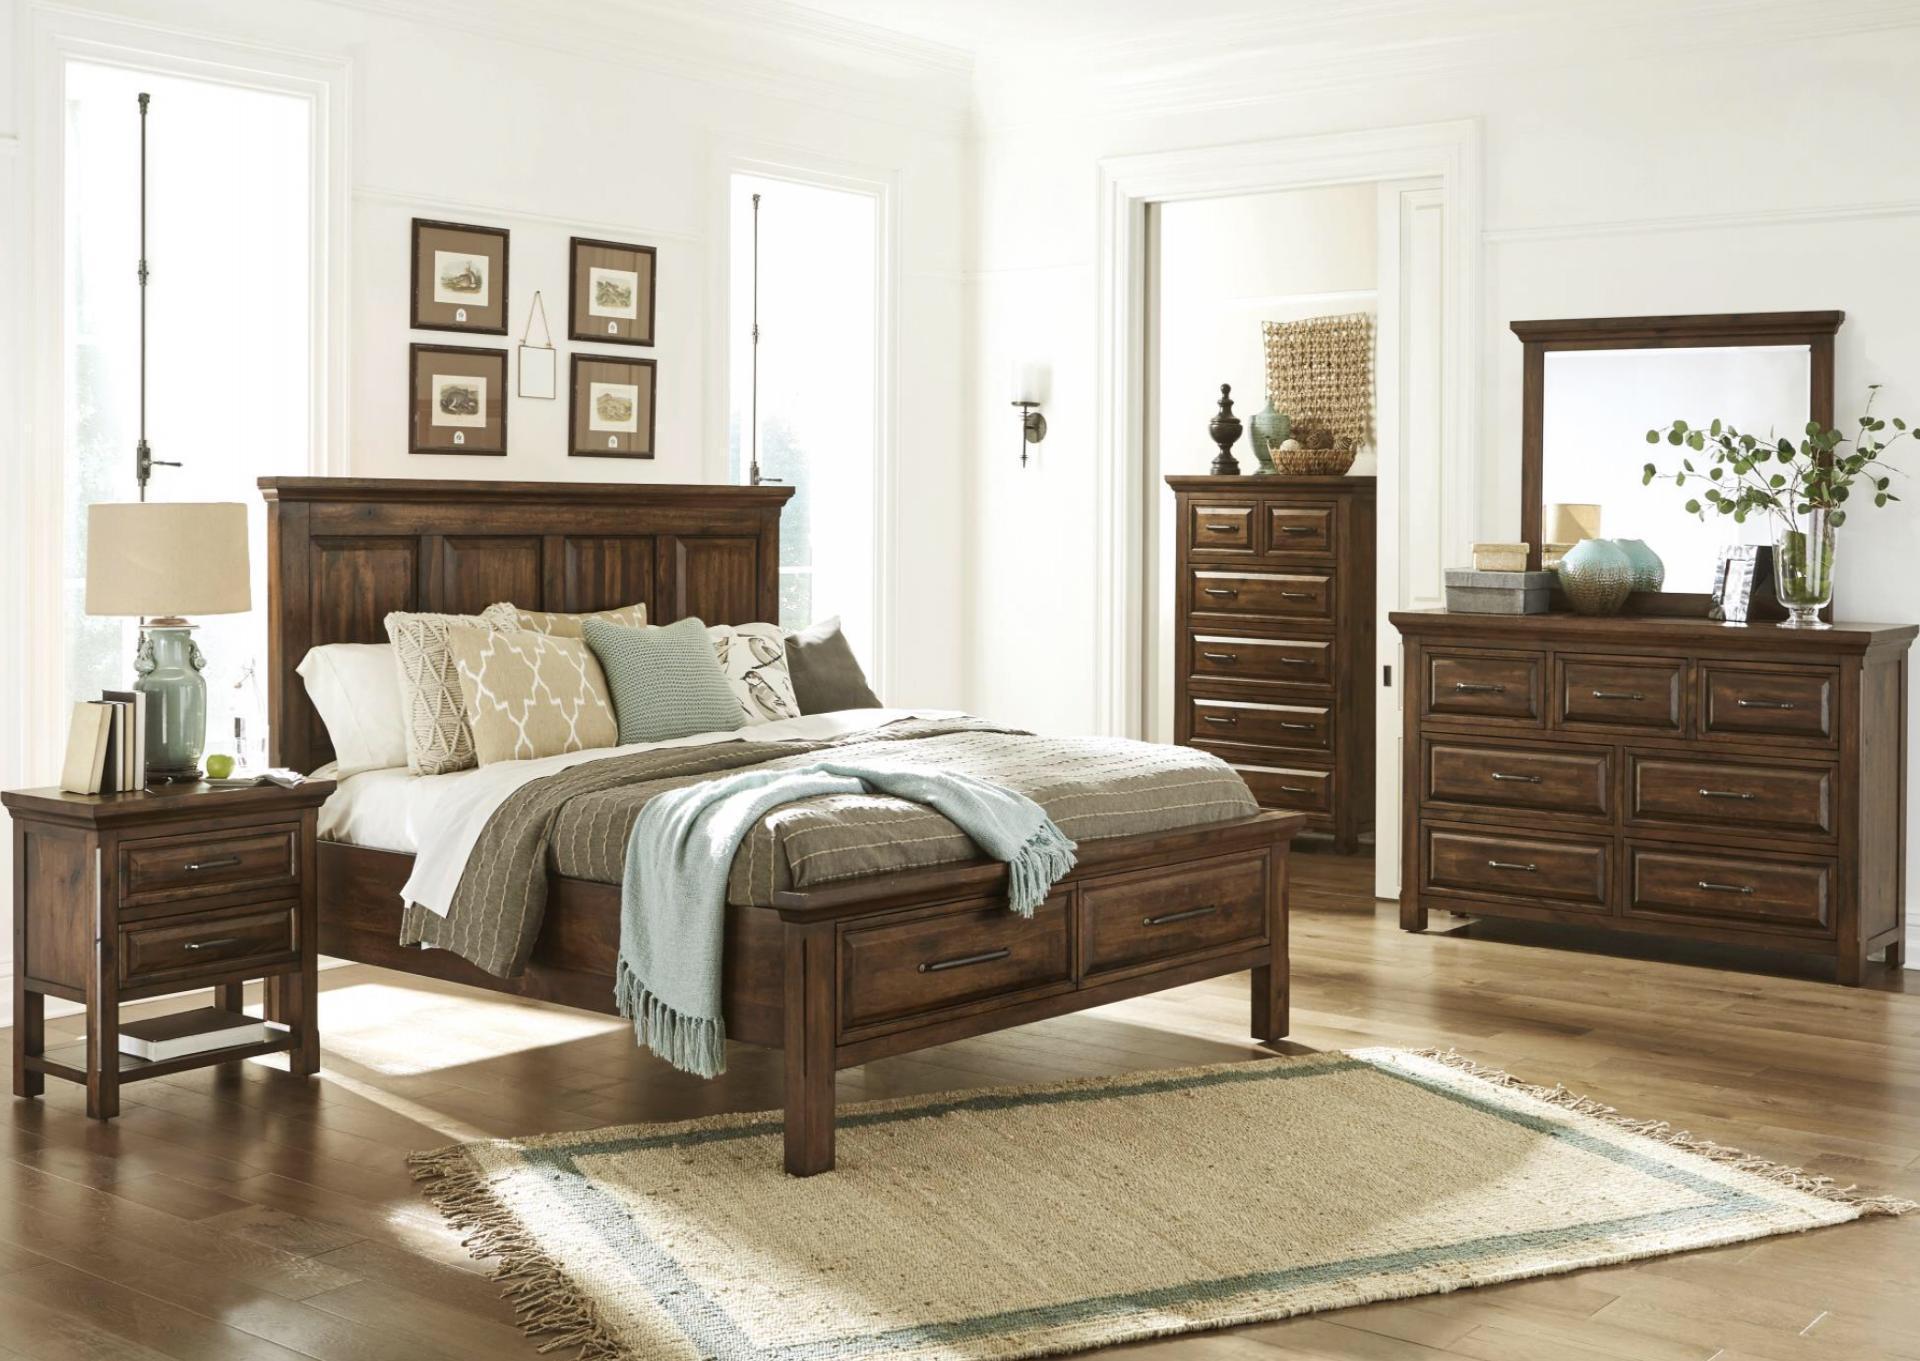 Hill Crest Cal-King storage bed,Napa Furniture